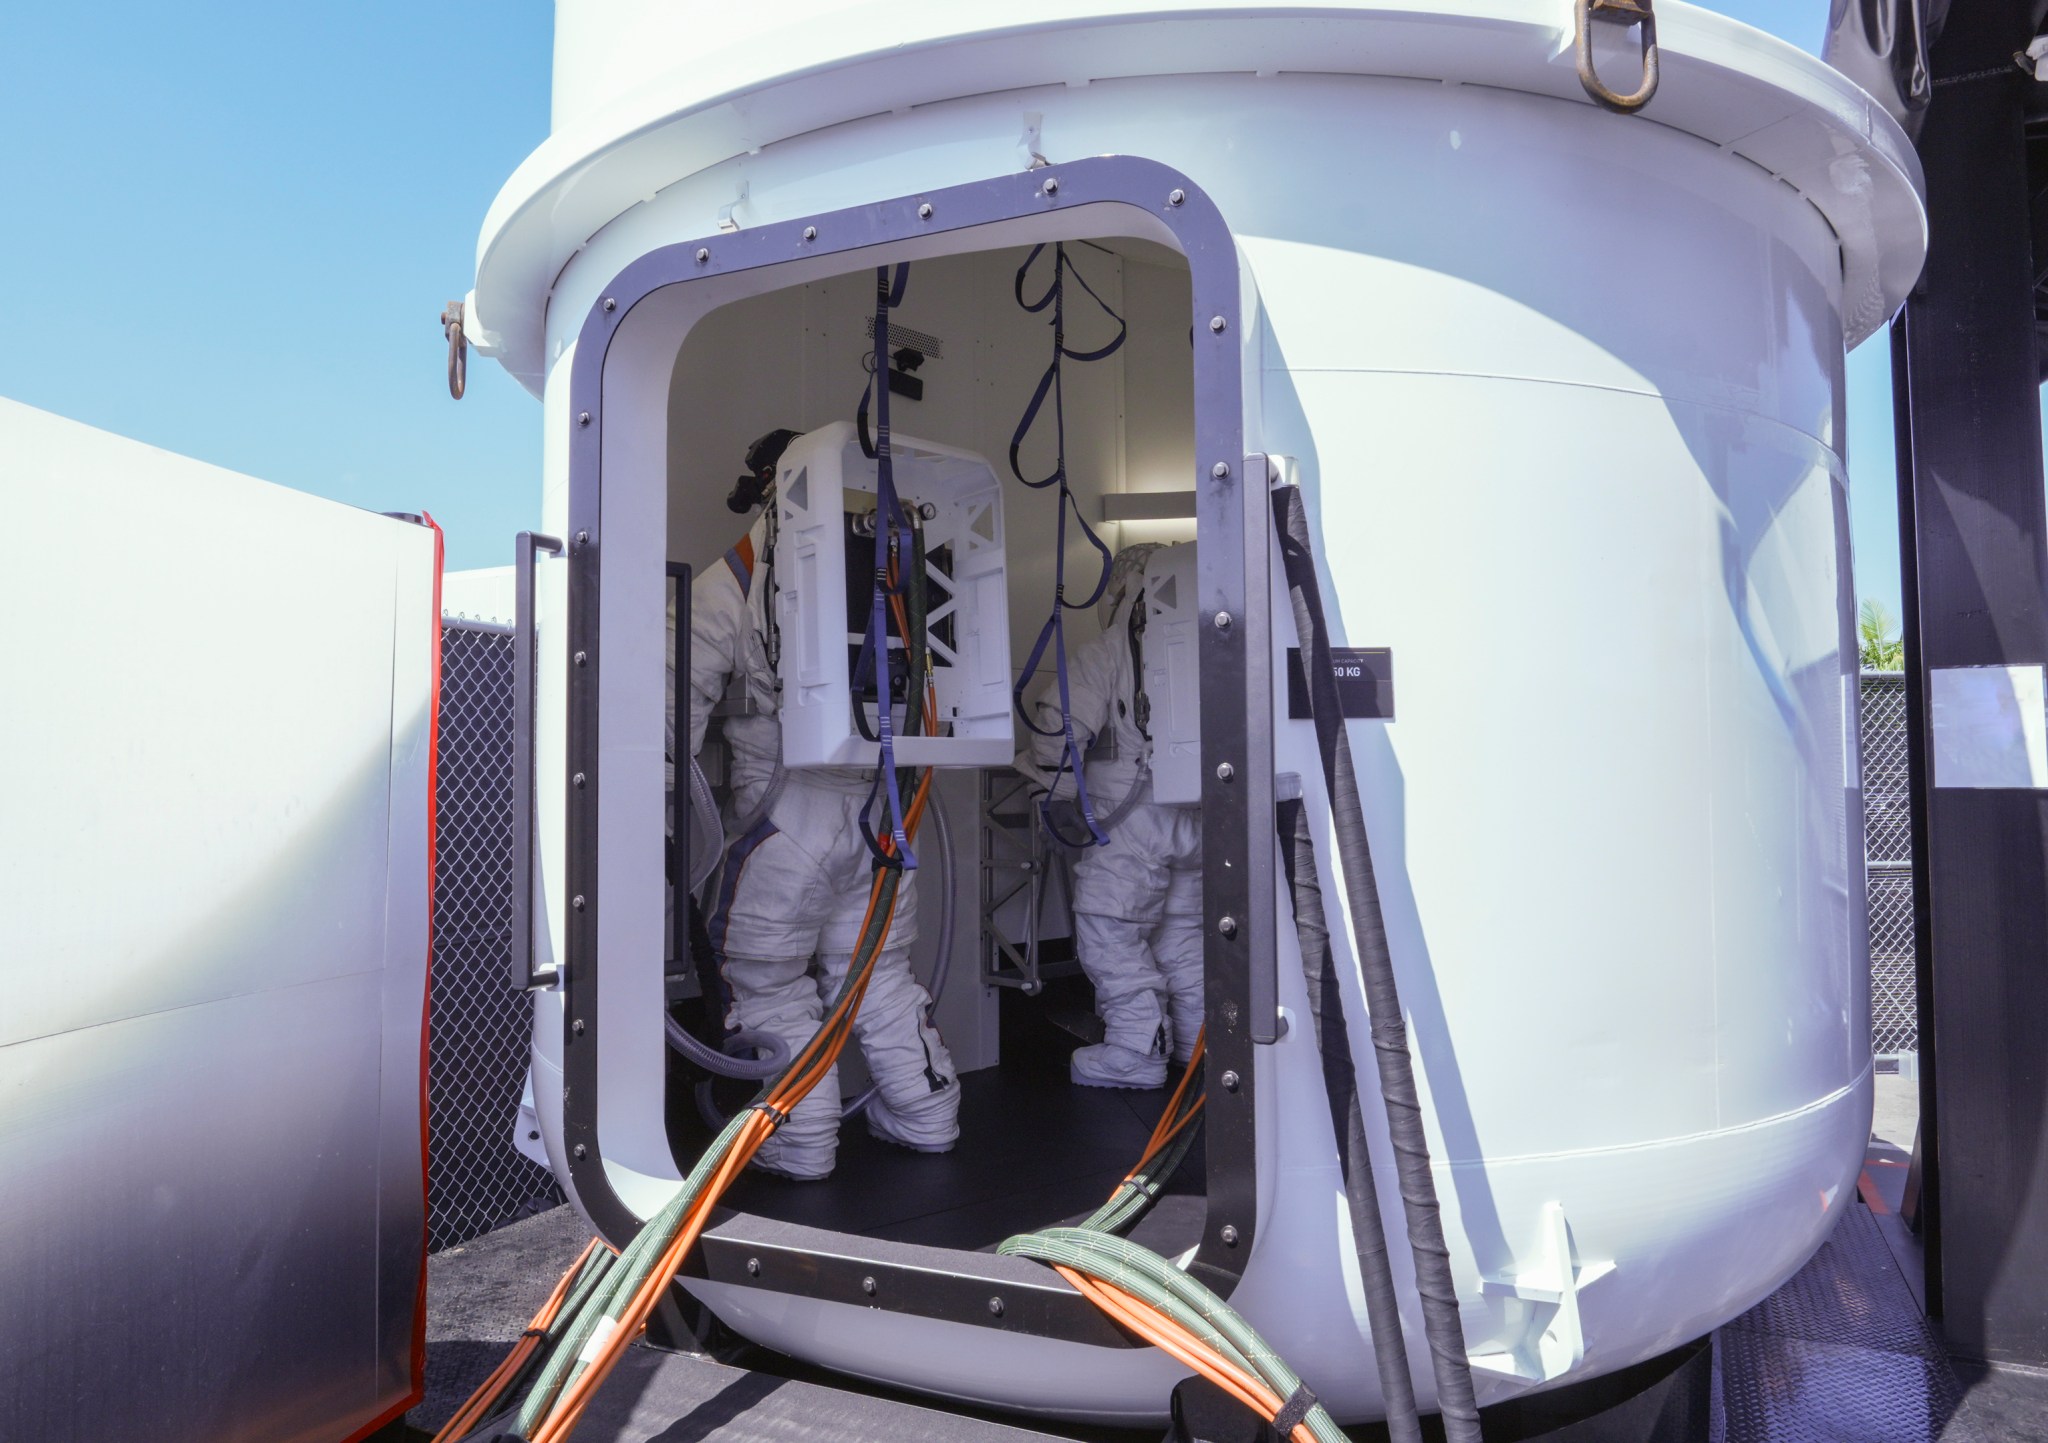 Astronauts were fully suited while conducting mission-like maneuvers in the full-scale build of the Starship human landing system’s airlock which will be located inside Starship under the crew cabin.